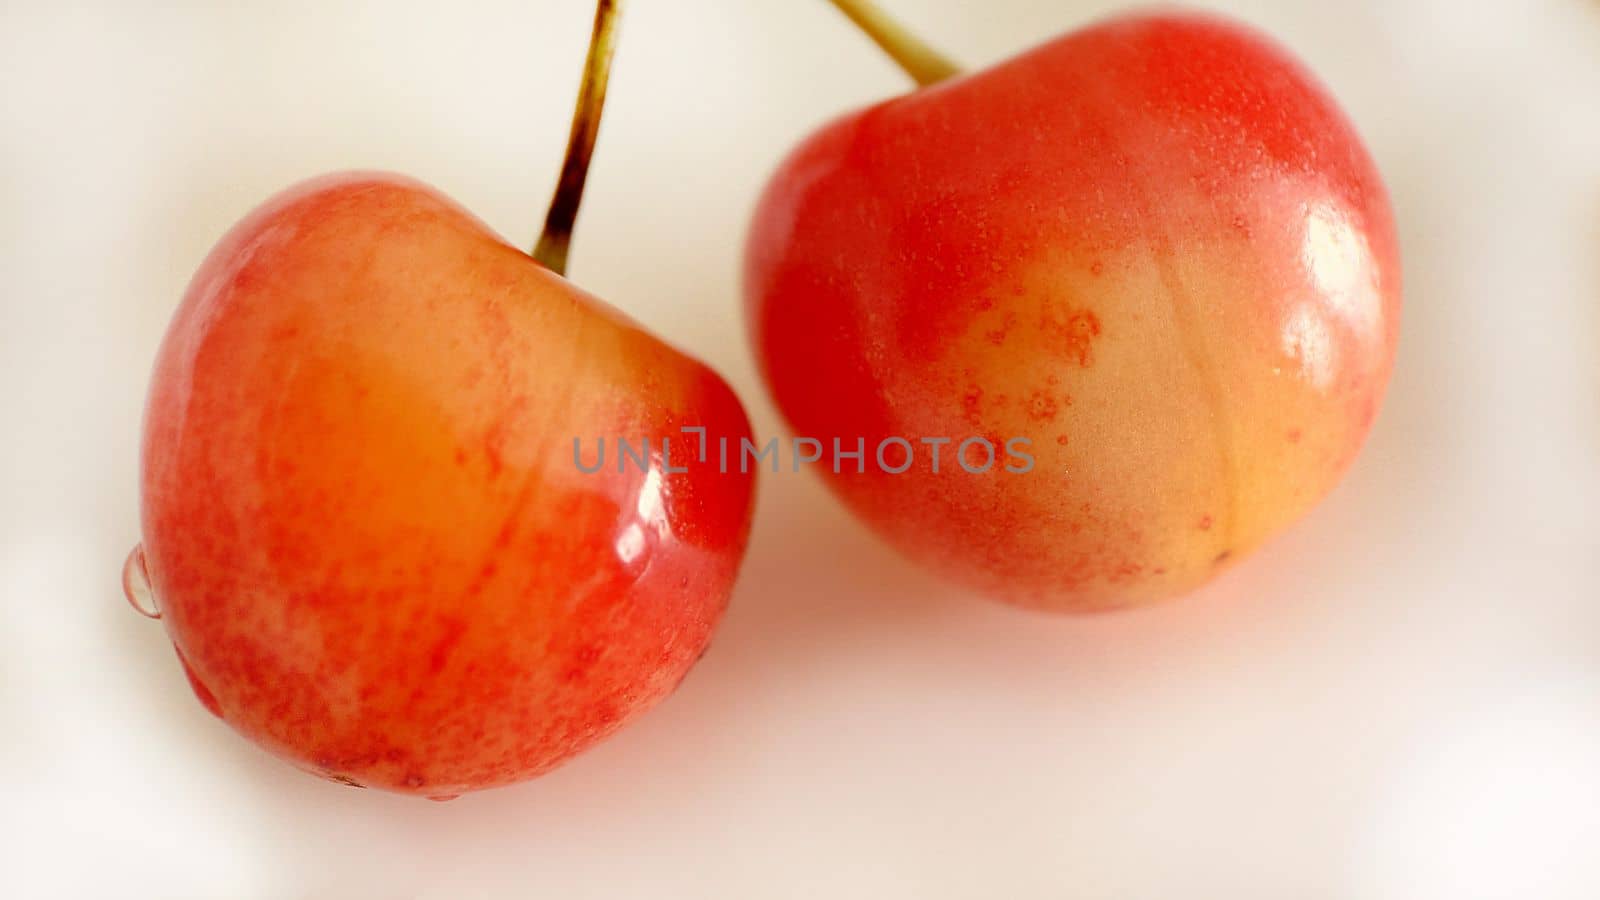 Two ripe cherries close-up on a light background by Mastak80